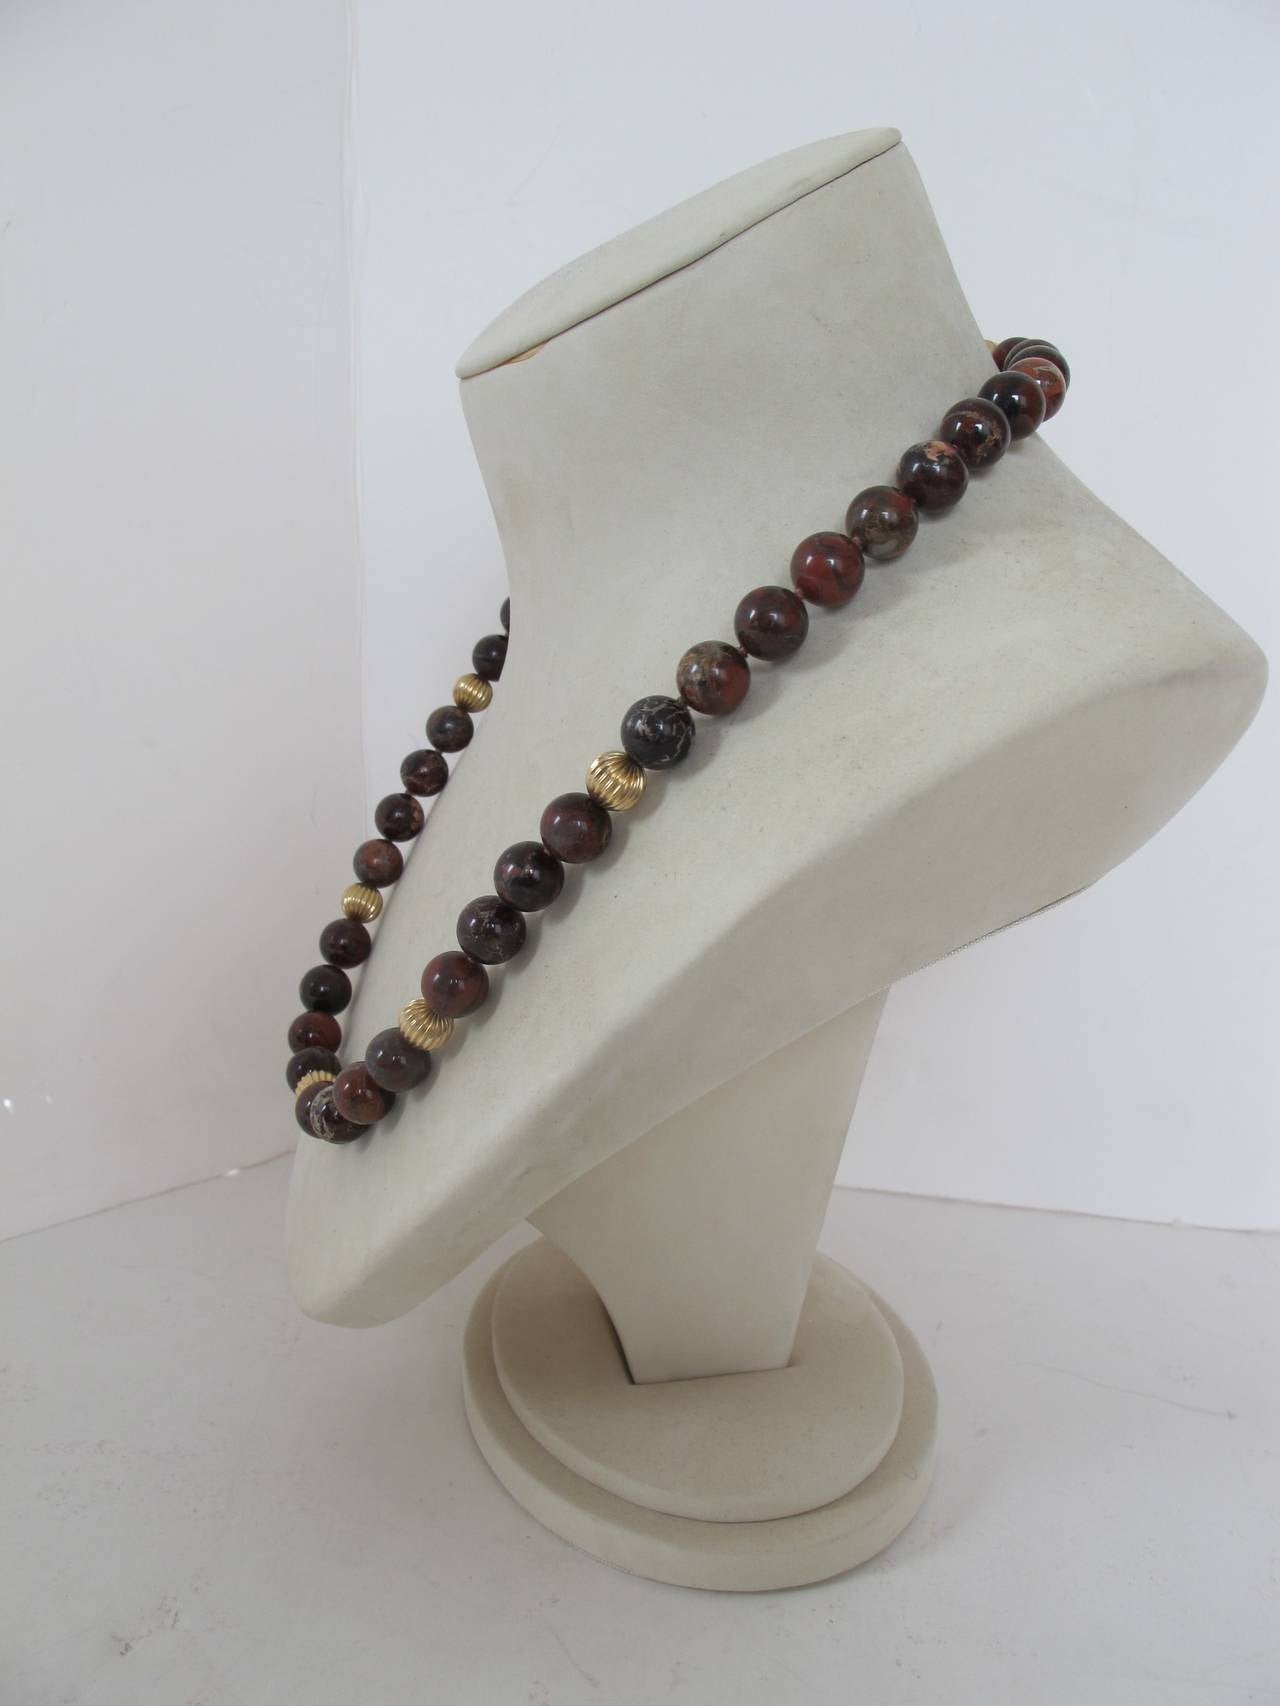 Elegant 1980's Agate Necklace with 40 agate stones and 5 gold ones. Clasp is marked Sterling Silver and Agate stone encased by gold surrounds the clasp. The Agate stones measure 1.2 cm wide. The gold ones measure 1 cm wide.